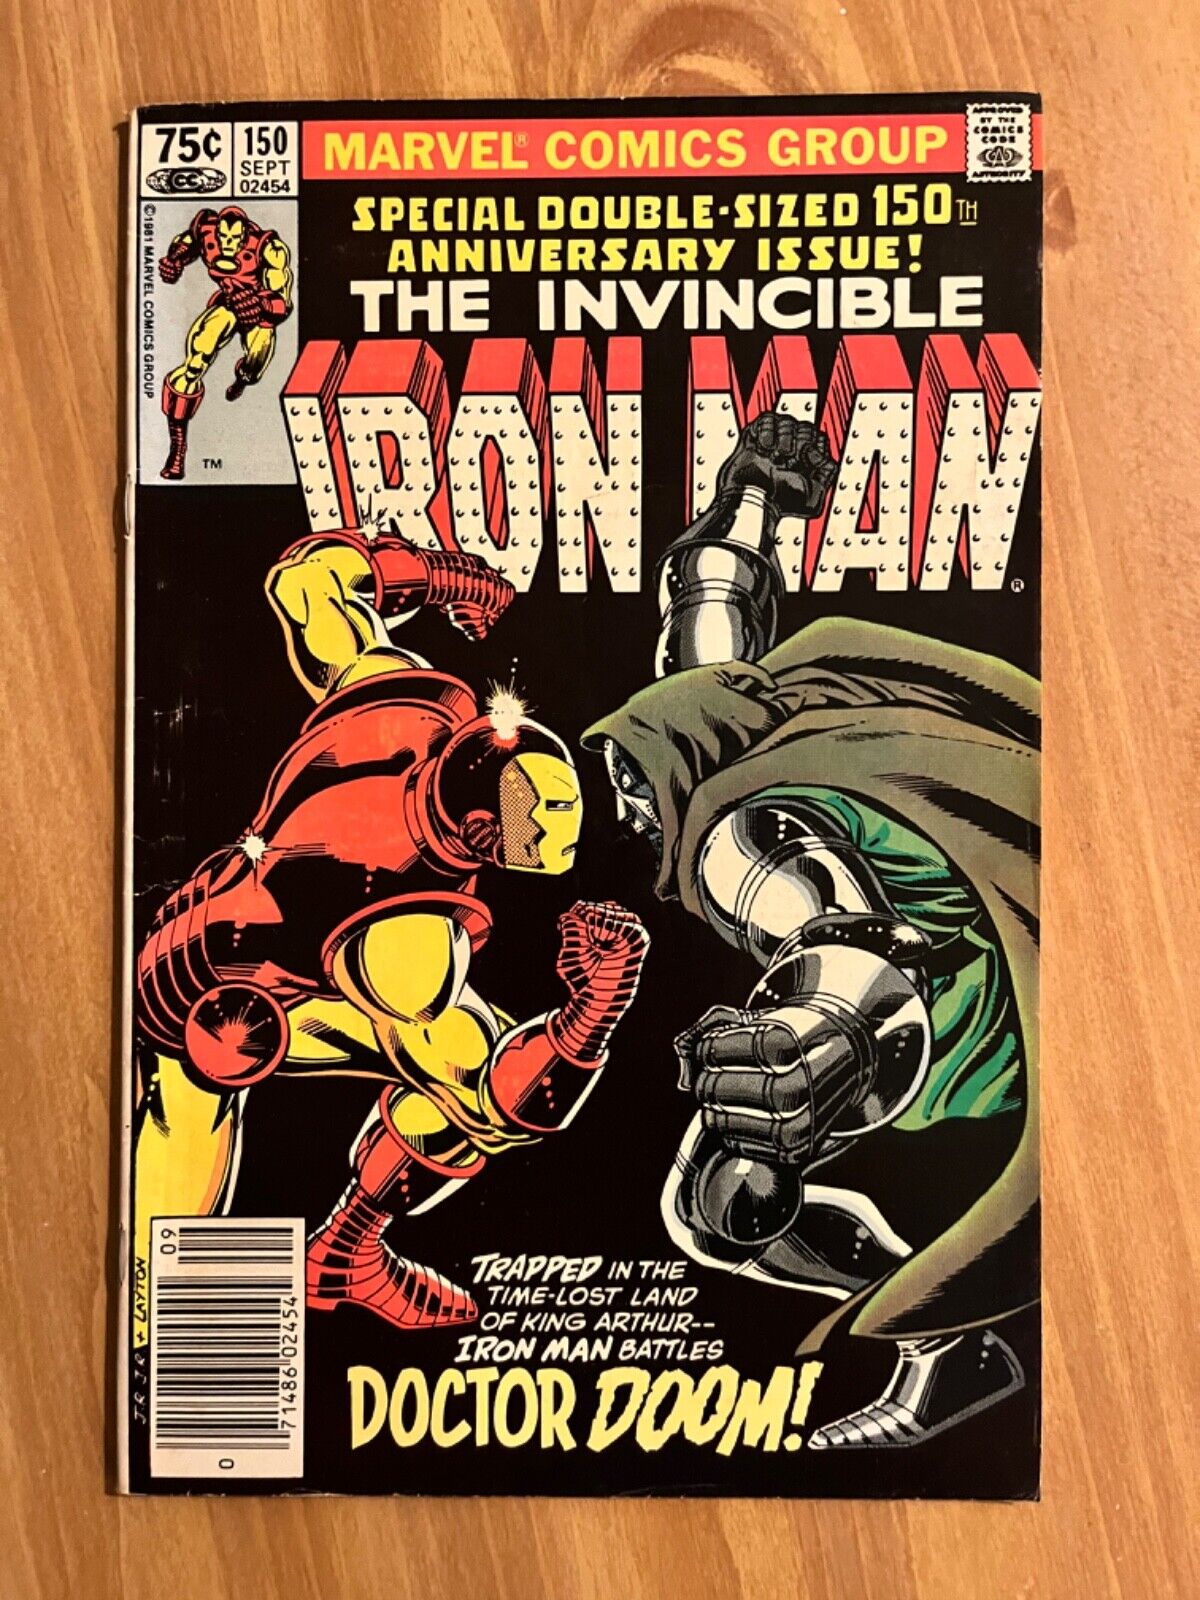 THE INVINCIBLE IRON MAN #150 (SPECIAL DOUBLE -SIZED  ANNIVERSARY ISSUE)